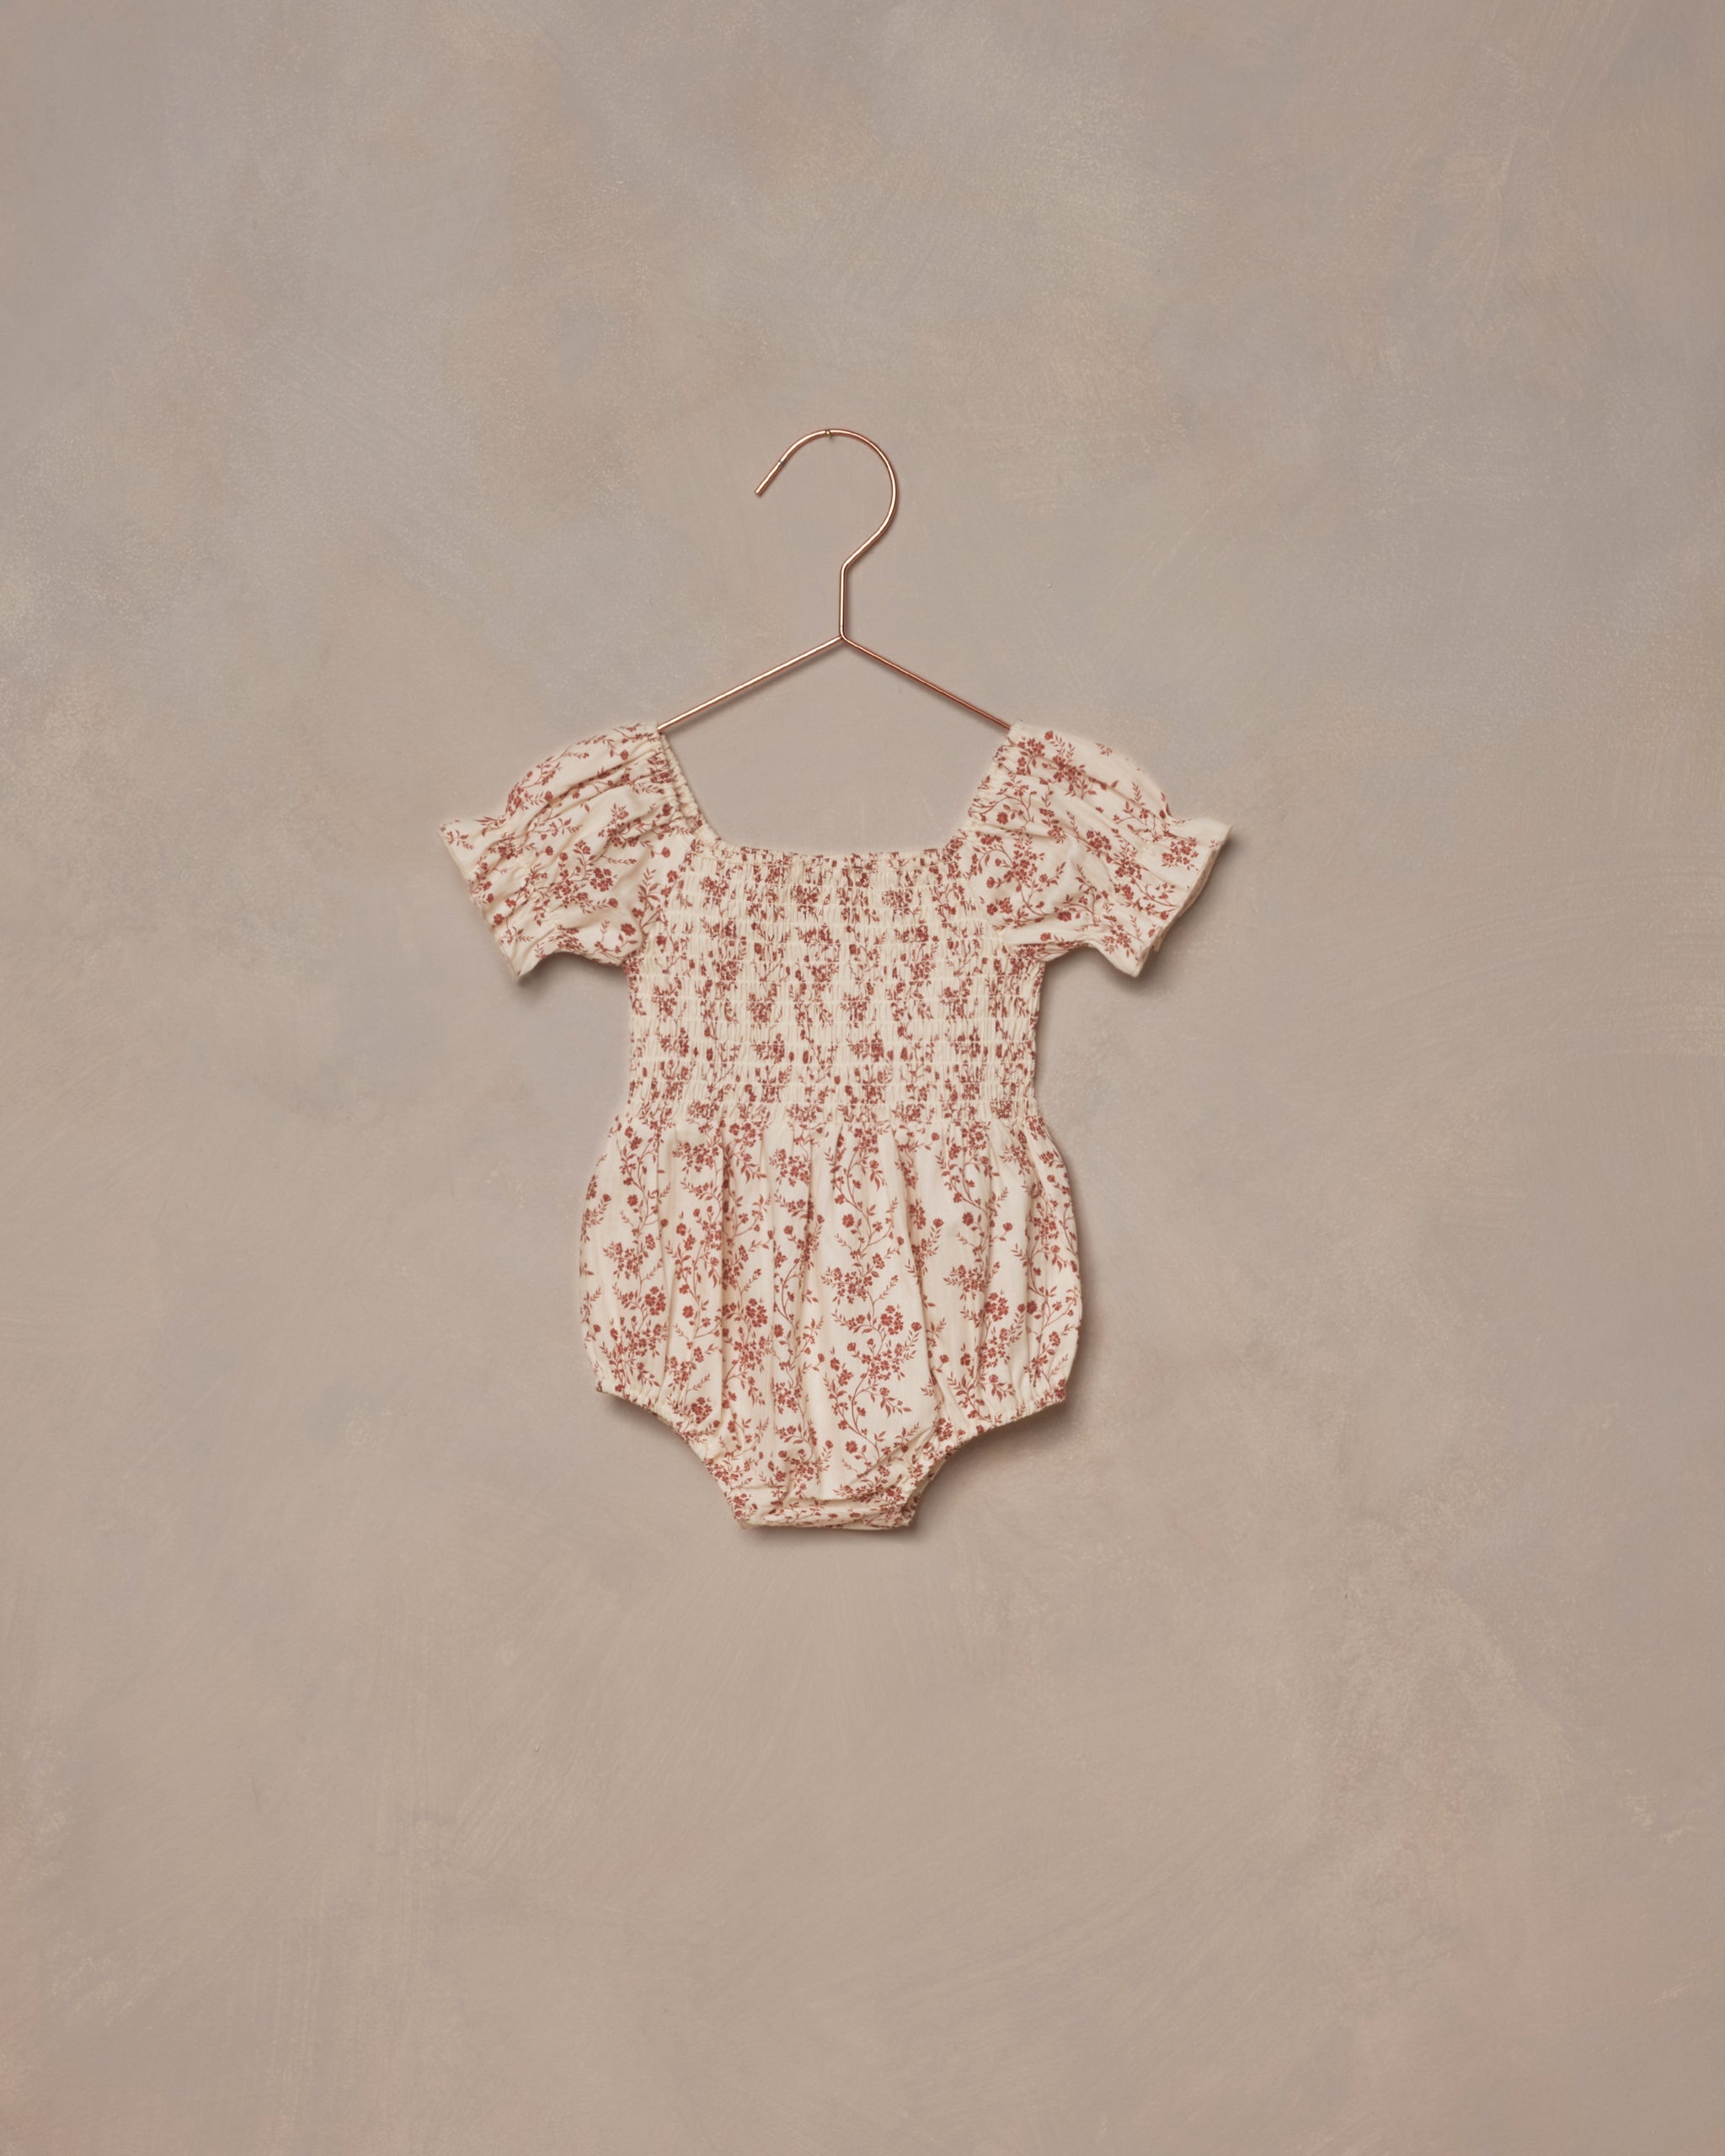 Cosette Romper || Vines - Rylee + Cru | Kids Clothes | Trendy Baby Clothes | Modern Infant Outfits |